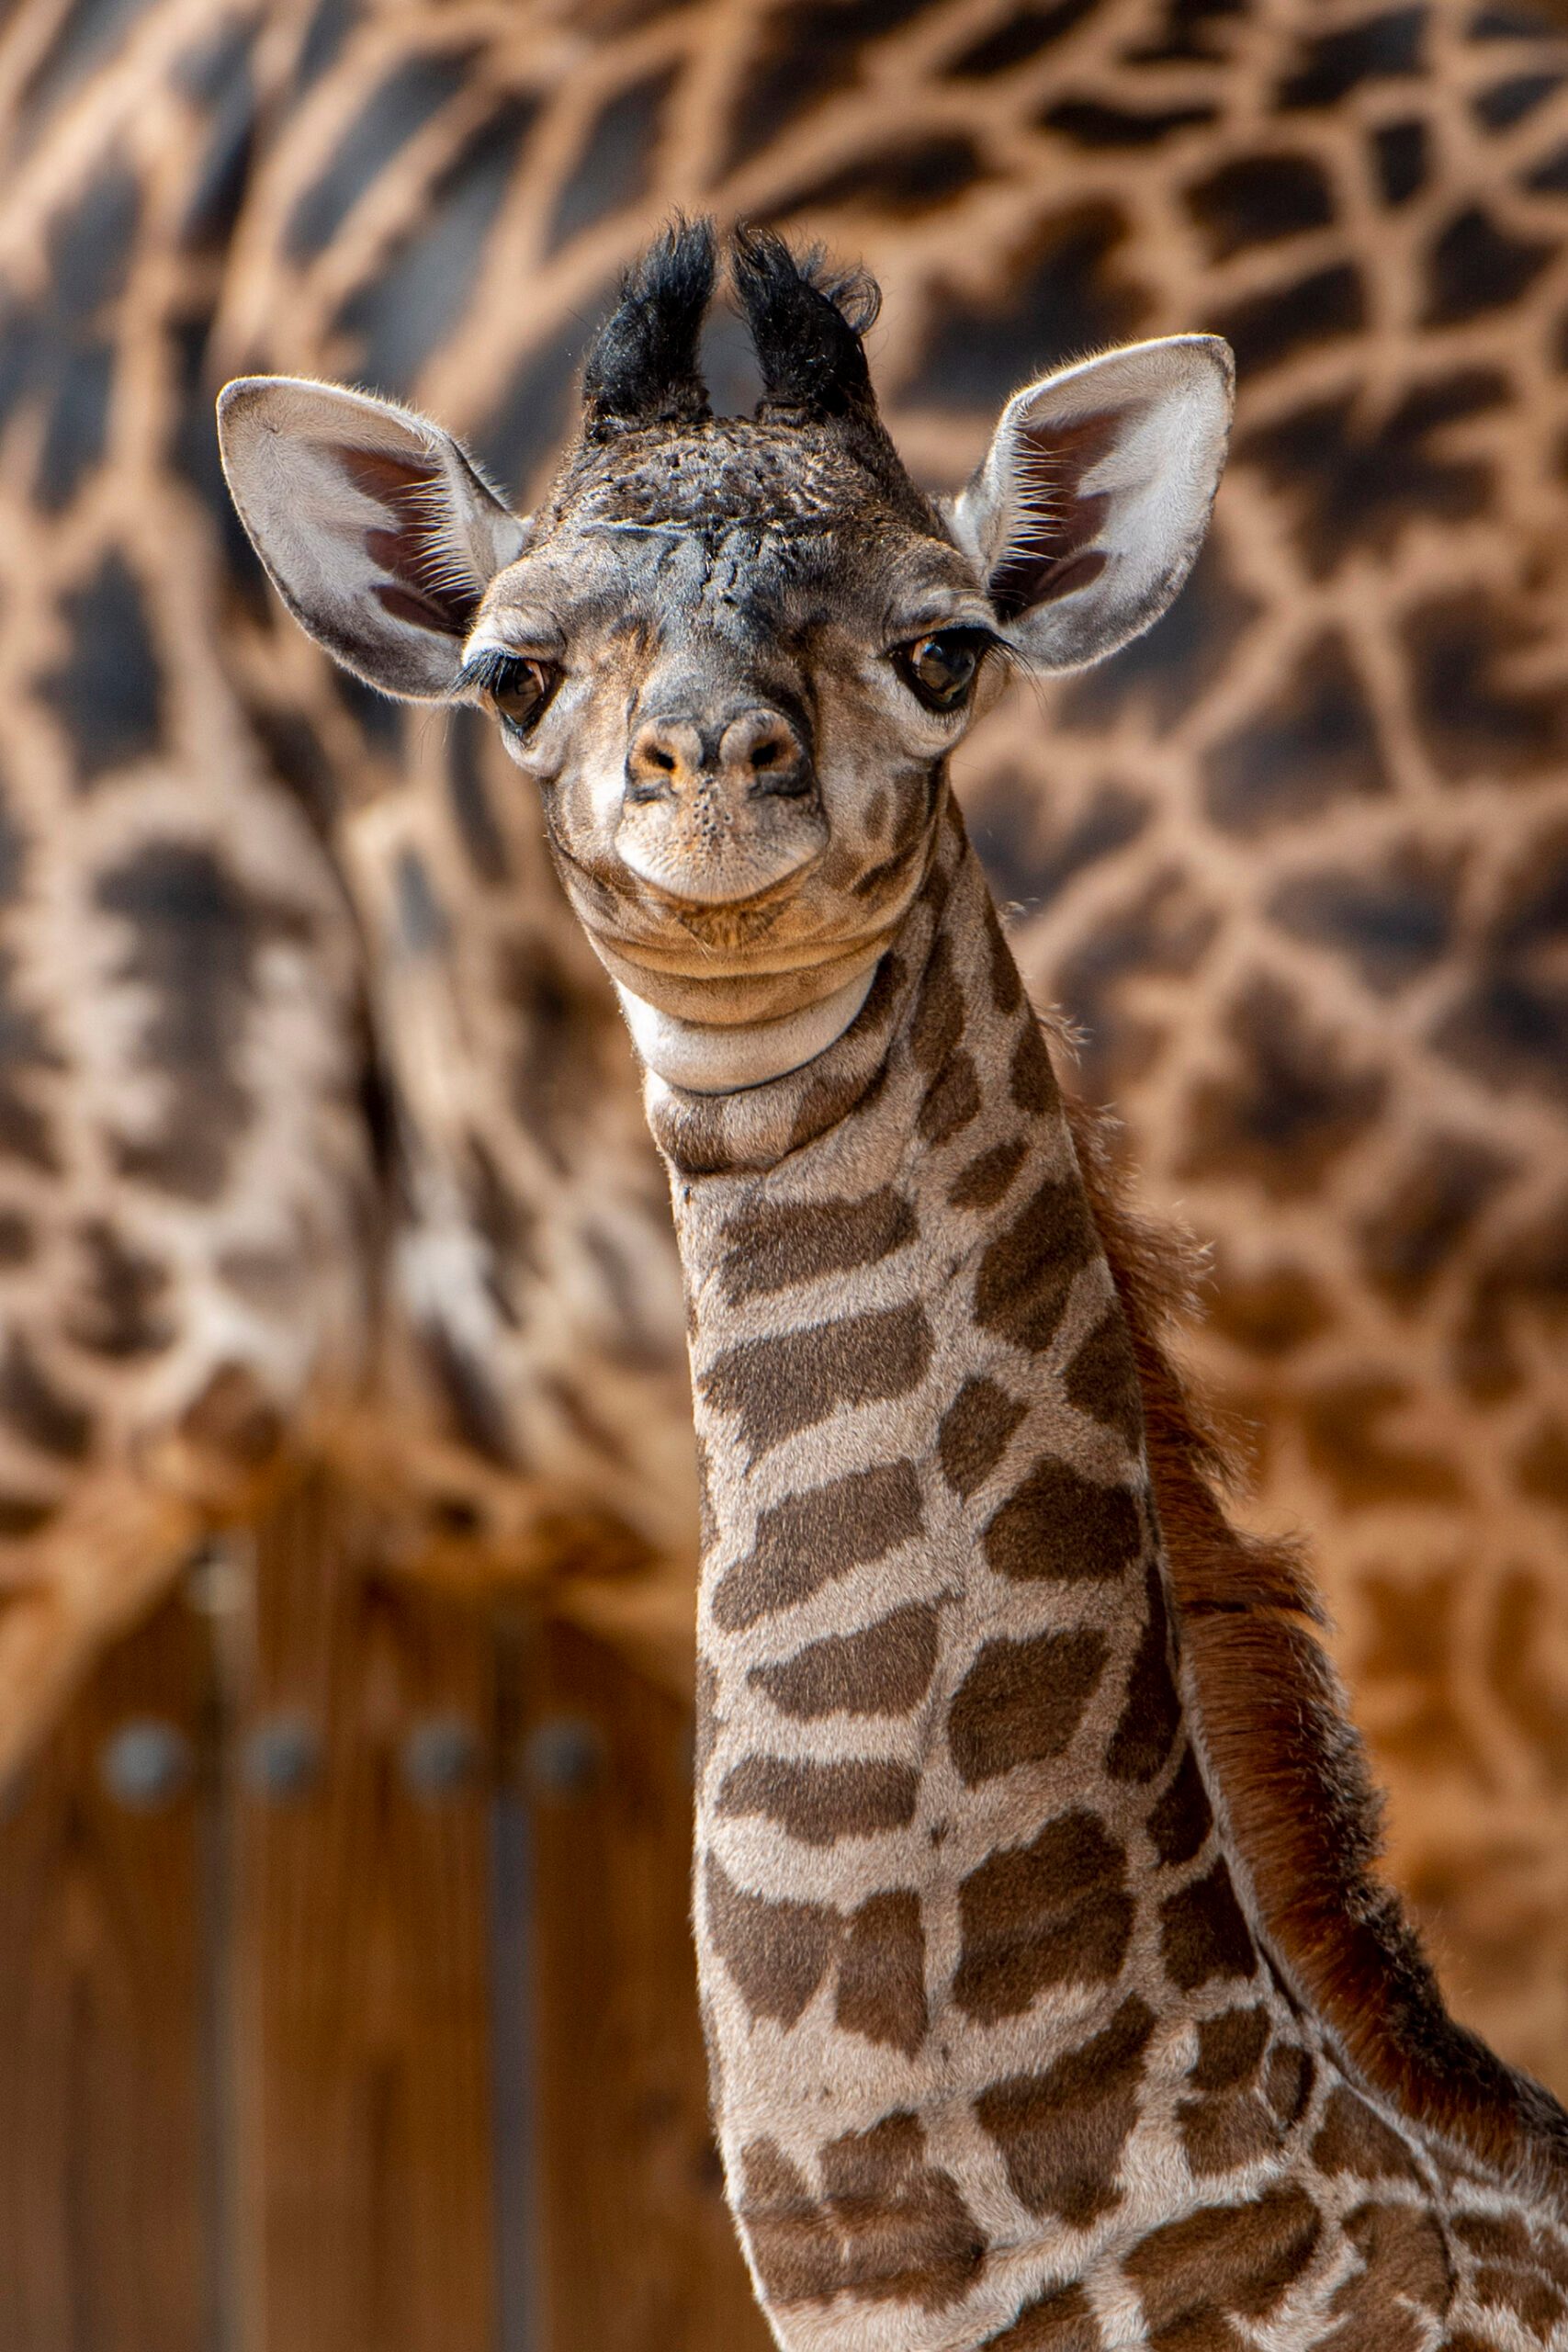 Disney's Animal Kingdom breeding program success continues with a third  giraffe birth at the park in the past year